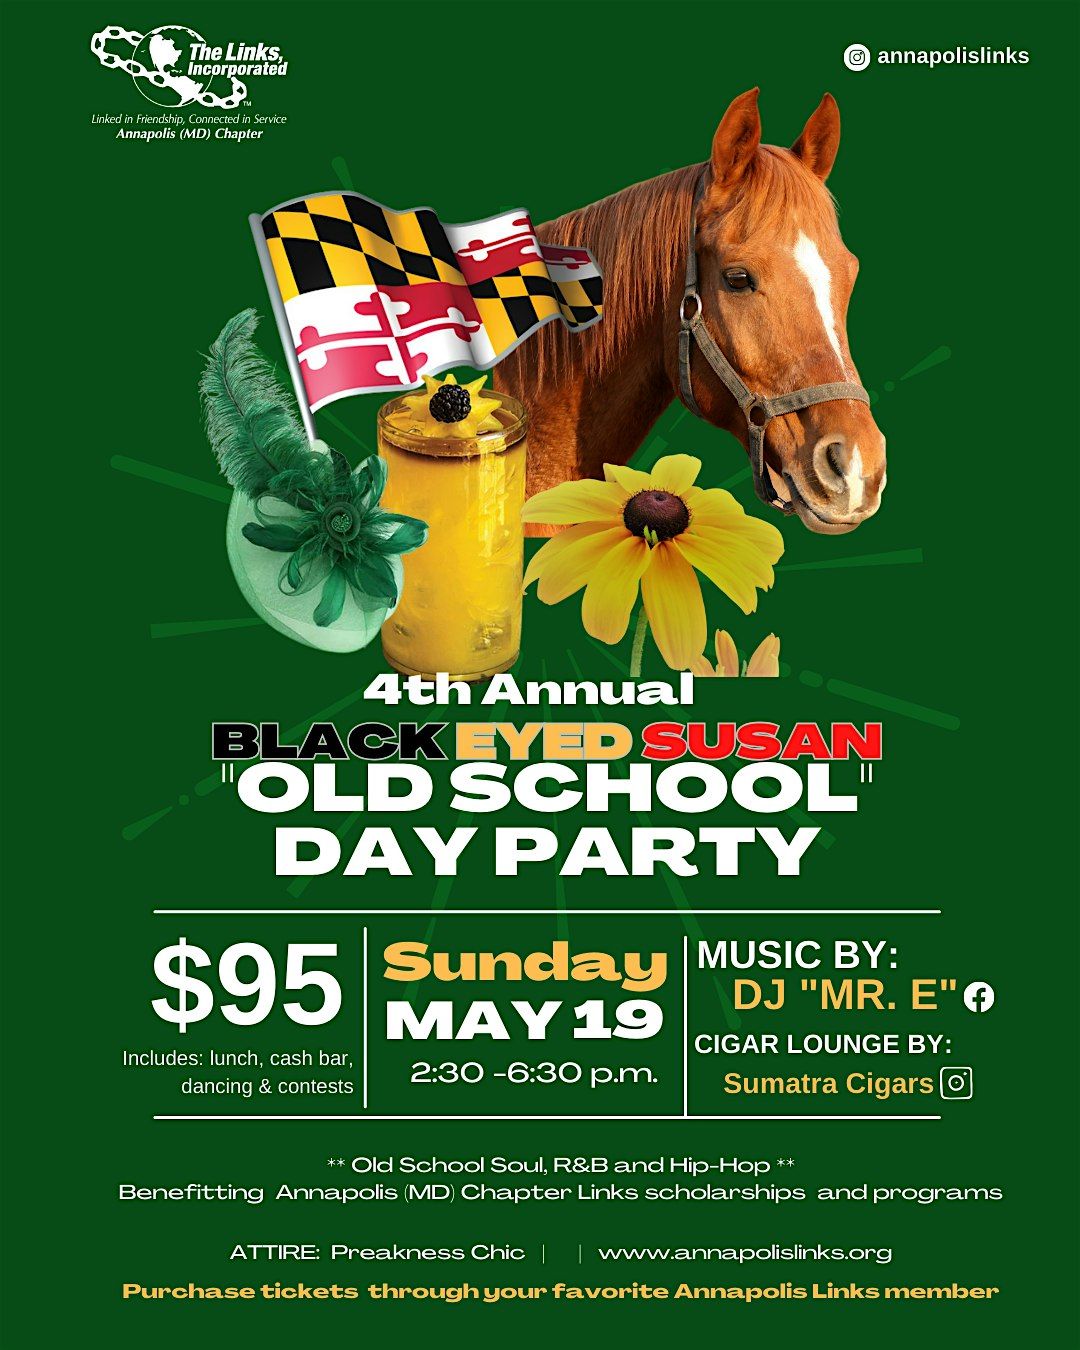 4th Annual Black Eyed Susan Old School Day Party